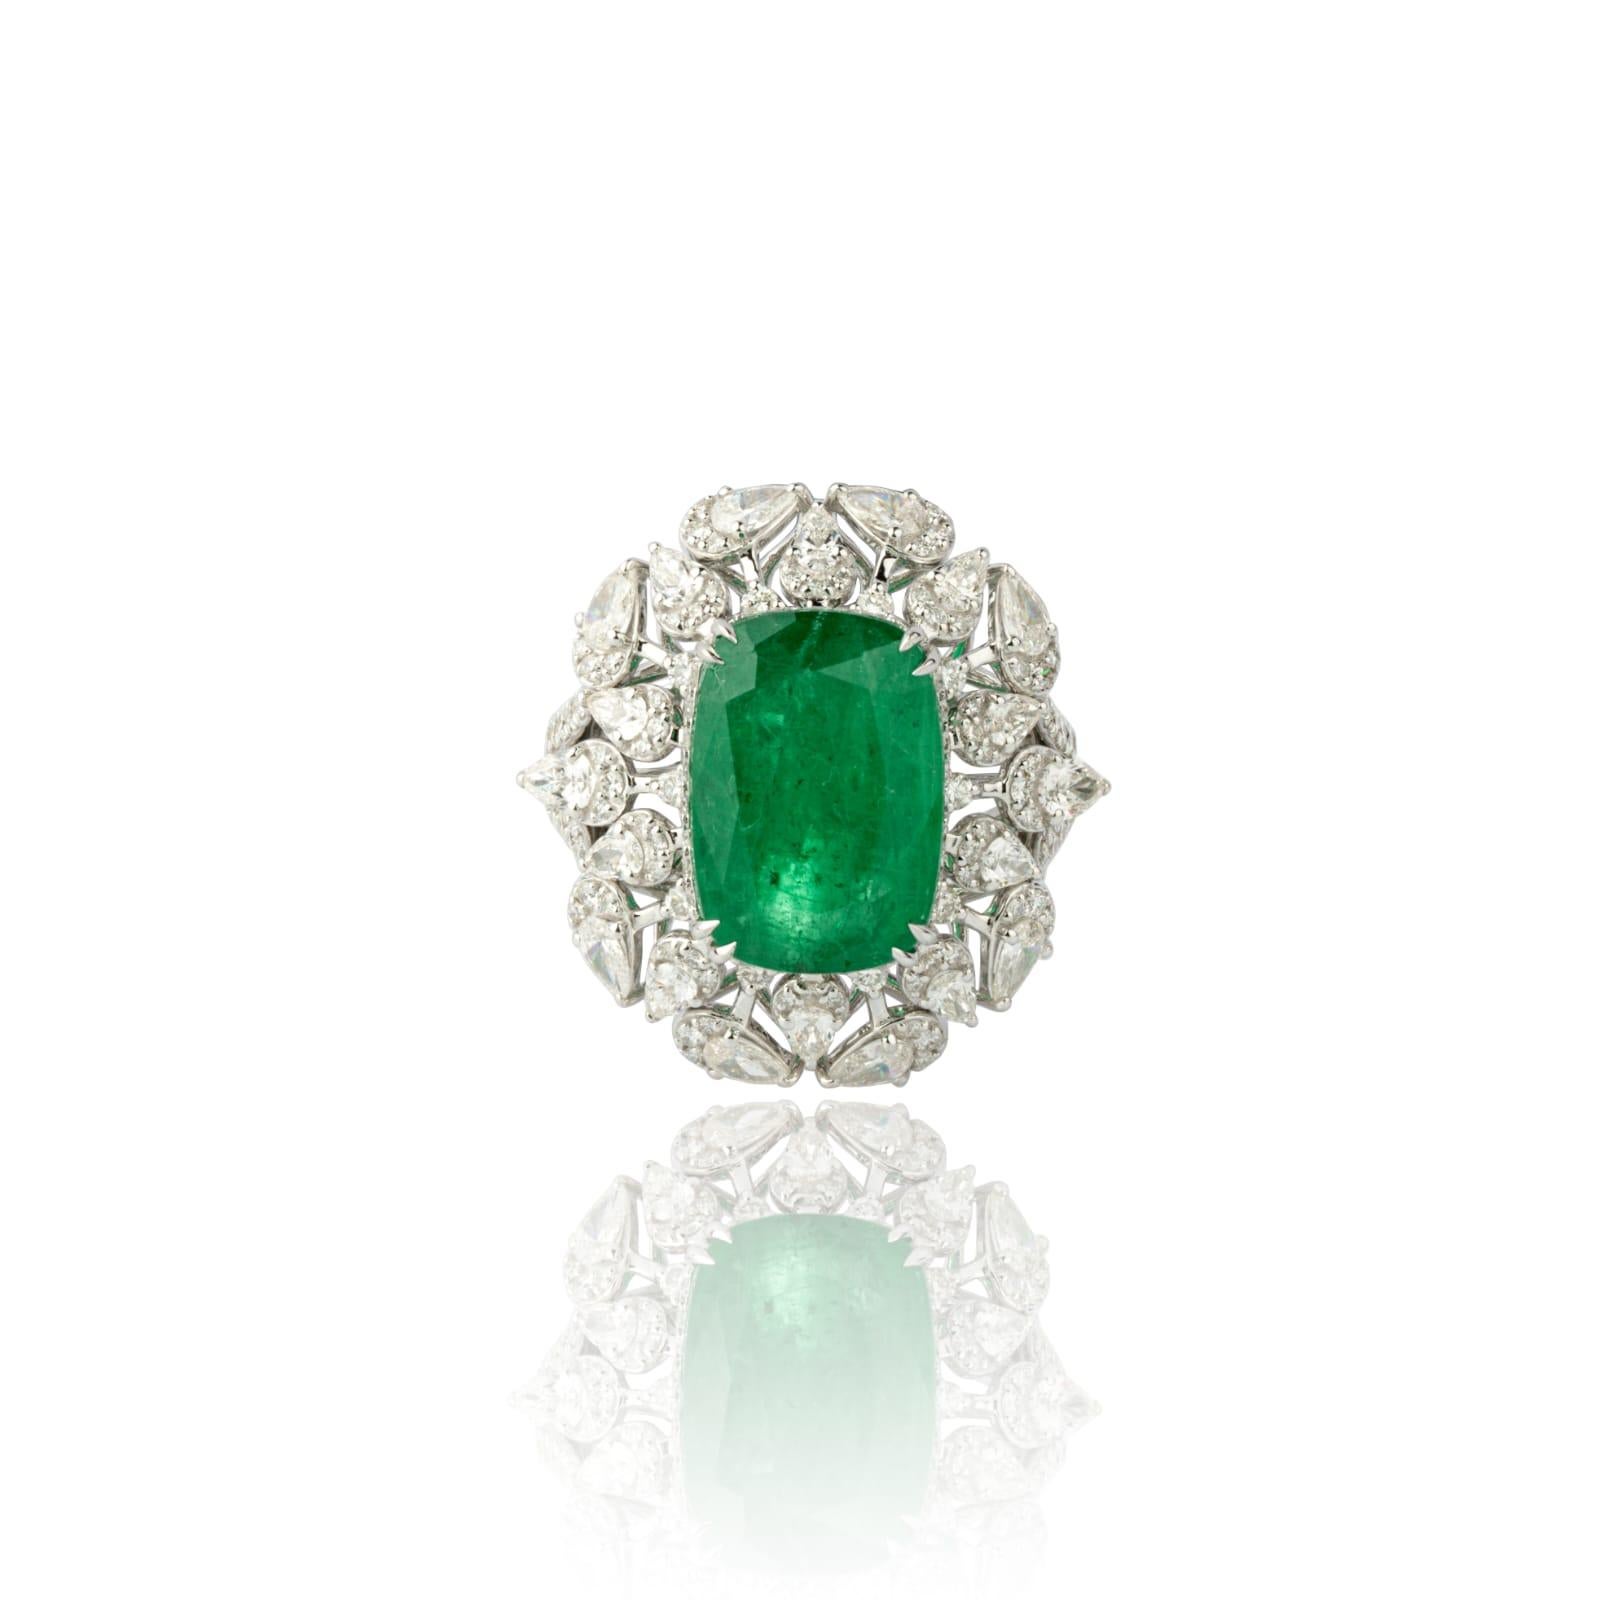 diamonds 2.35cts
emerald 7.15cts
gold  10.26gms



It’s very hard to capture the true color and luster of the stone, I have tried to add pictures which are taken professionally and by me from my I phone to reflect the true image of the item.
Most of